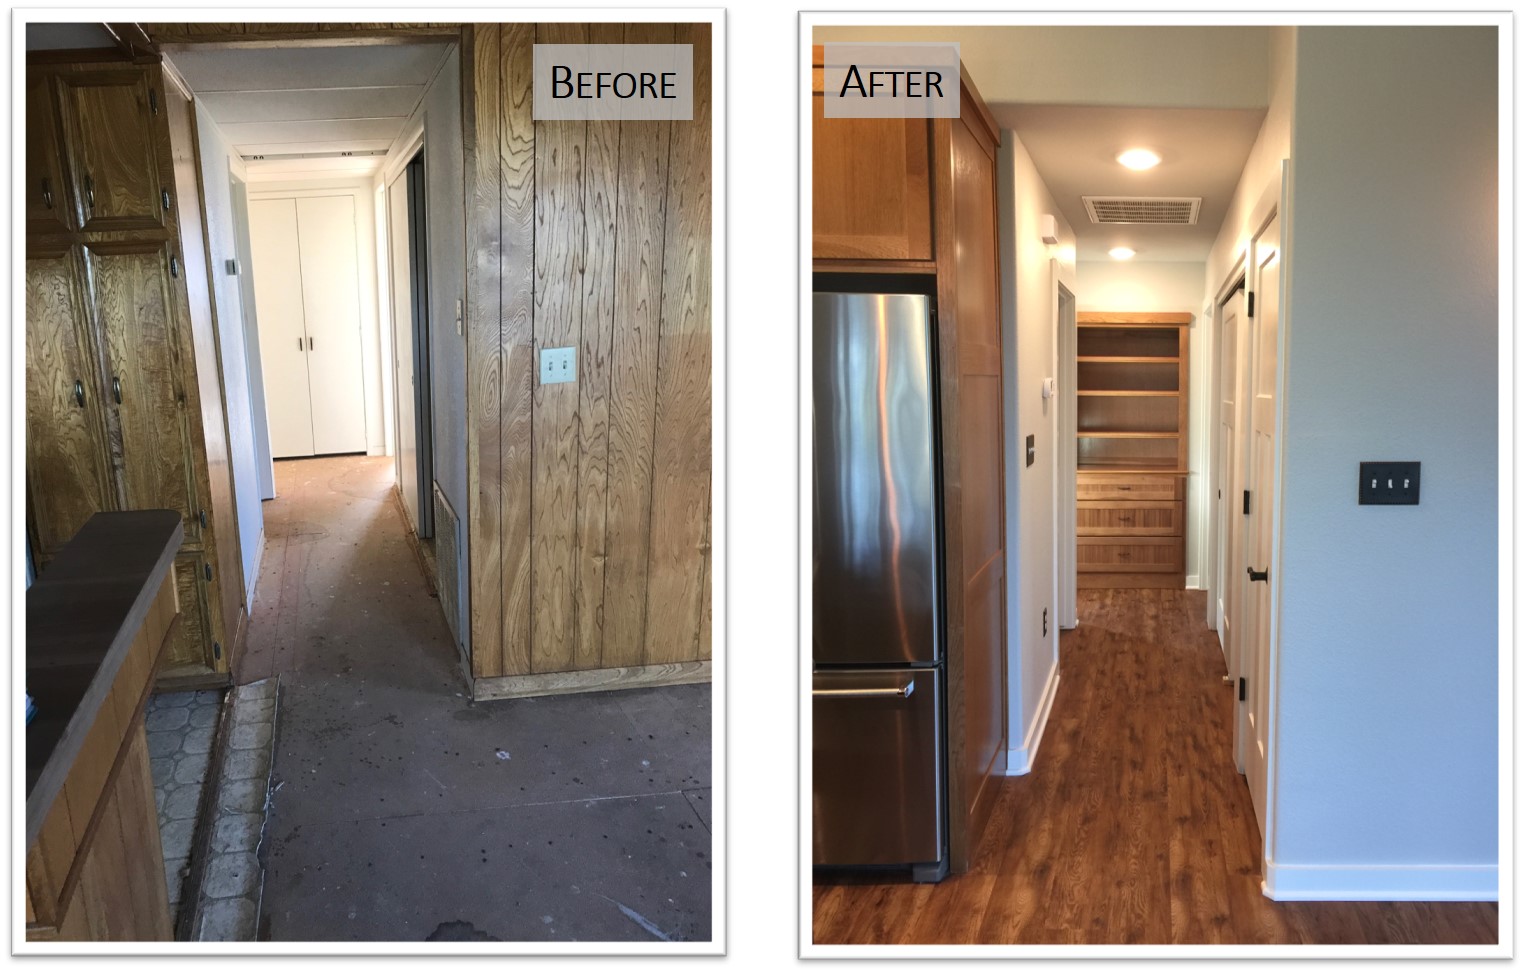 910 PLL, Interior Hall, Before and After, Bear Creek Homes.jpg